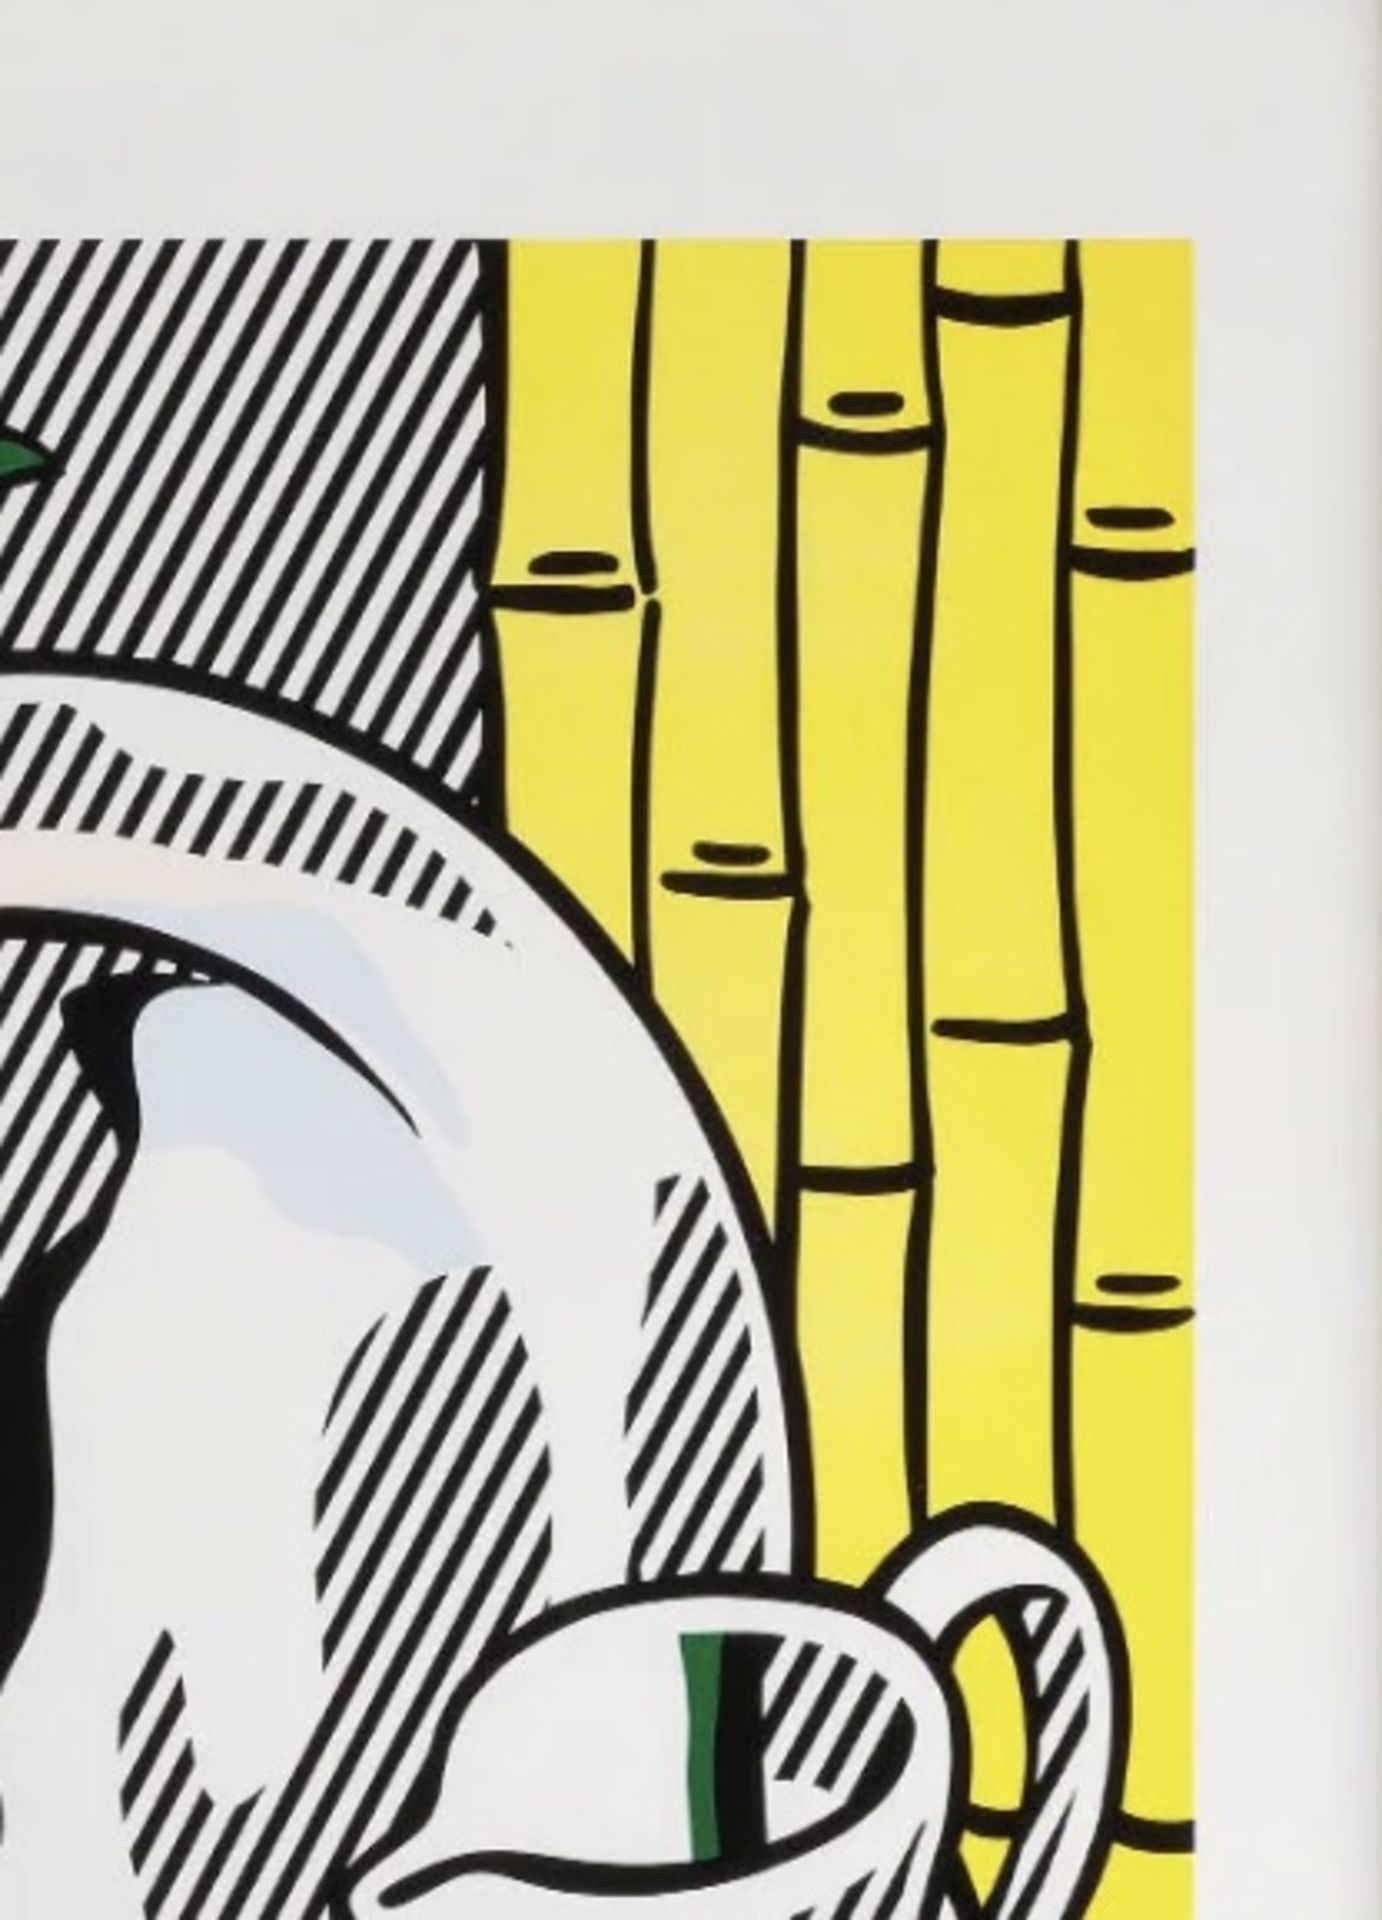 Roy Lichtenstein "Untitled" Plate Signed Offset Lithograph - Image 4 of 5